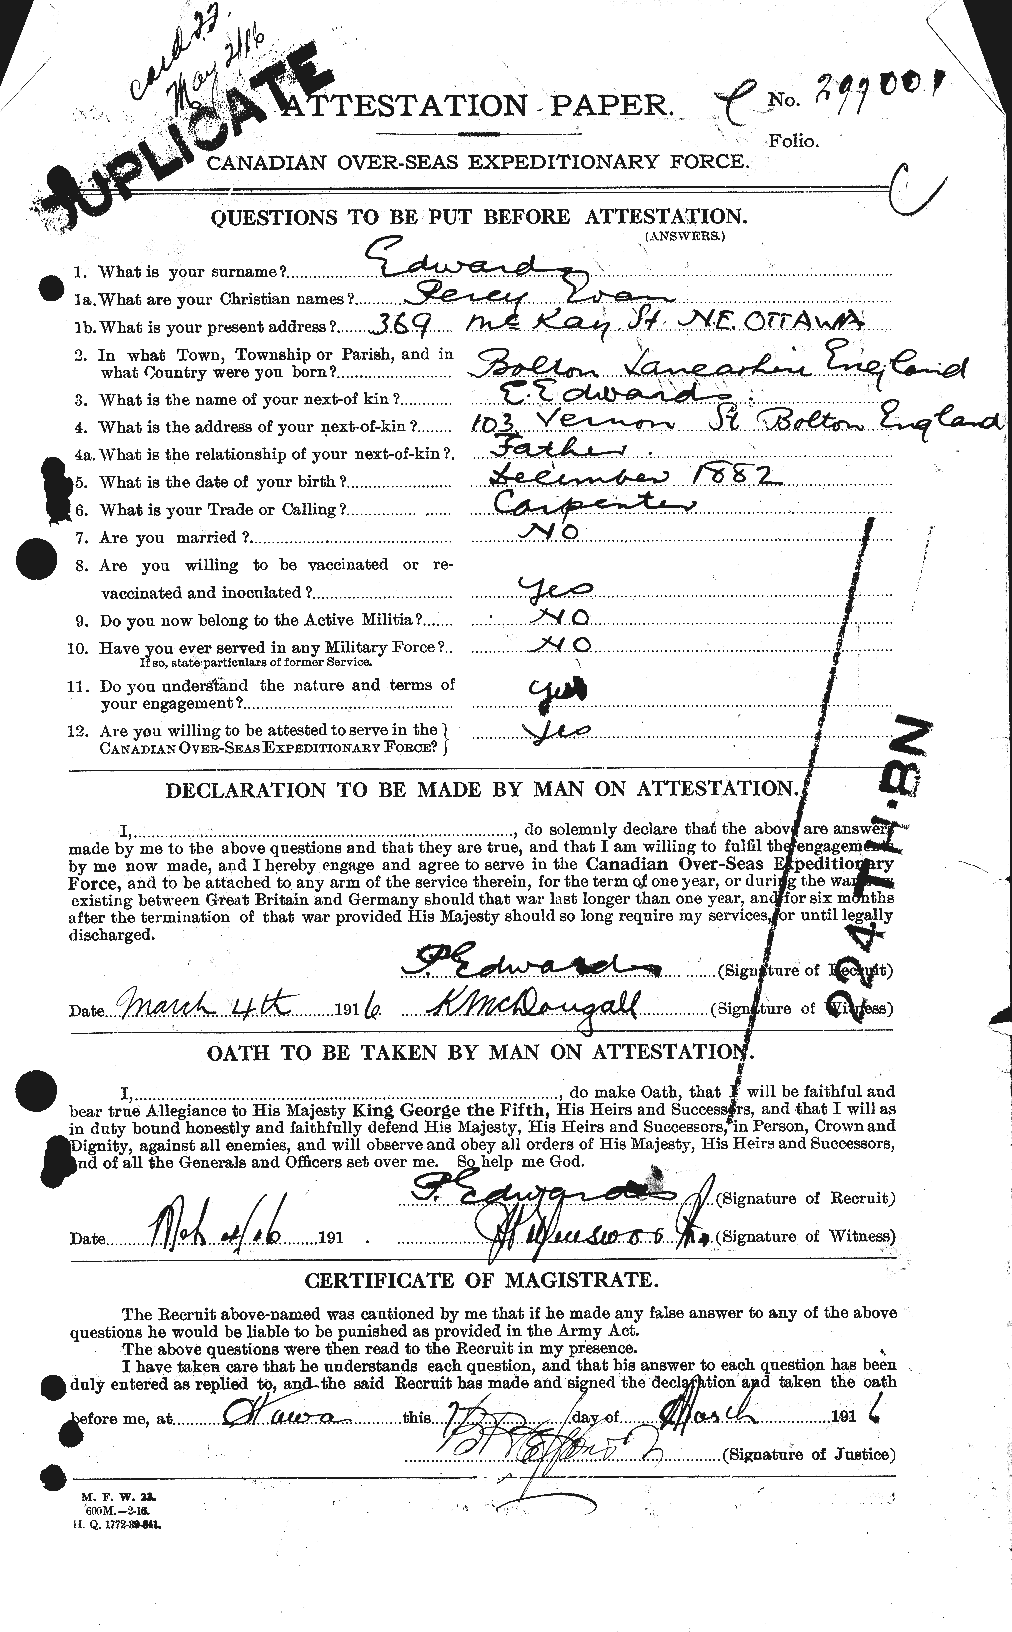 Personnel Records of the First World War - CEF 310235a